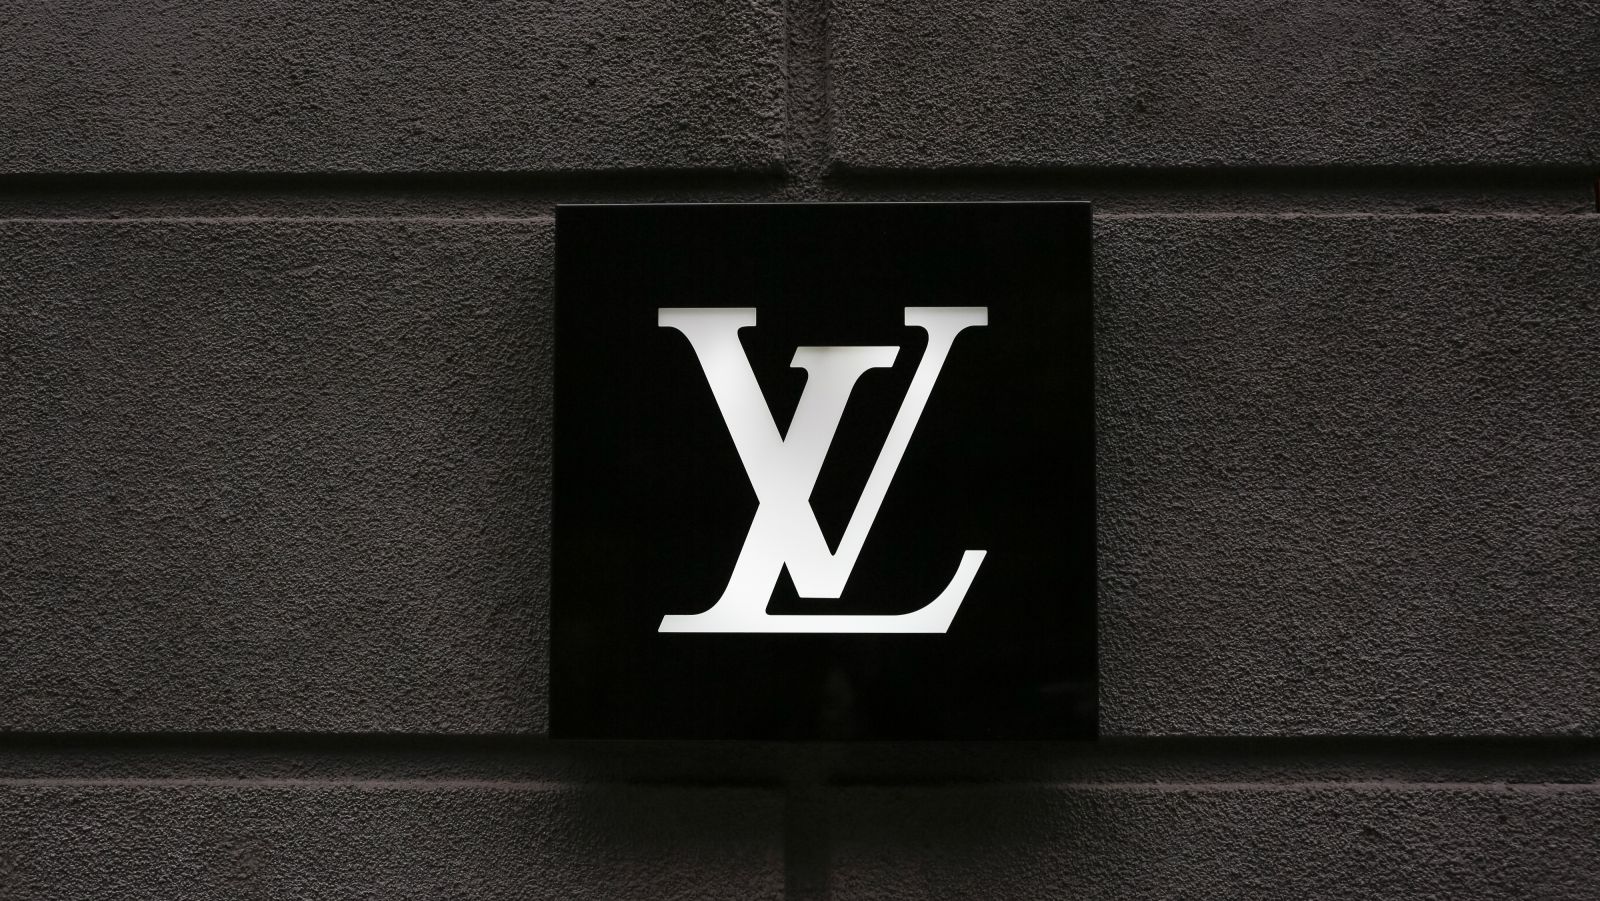 Louis Vuitton sues Korean restaurant for using the brand name to sell chicken